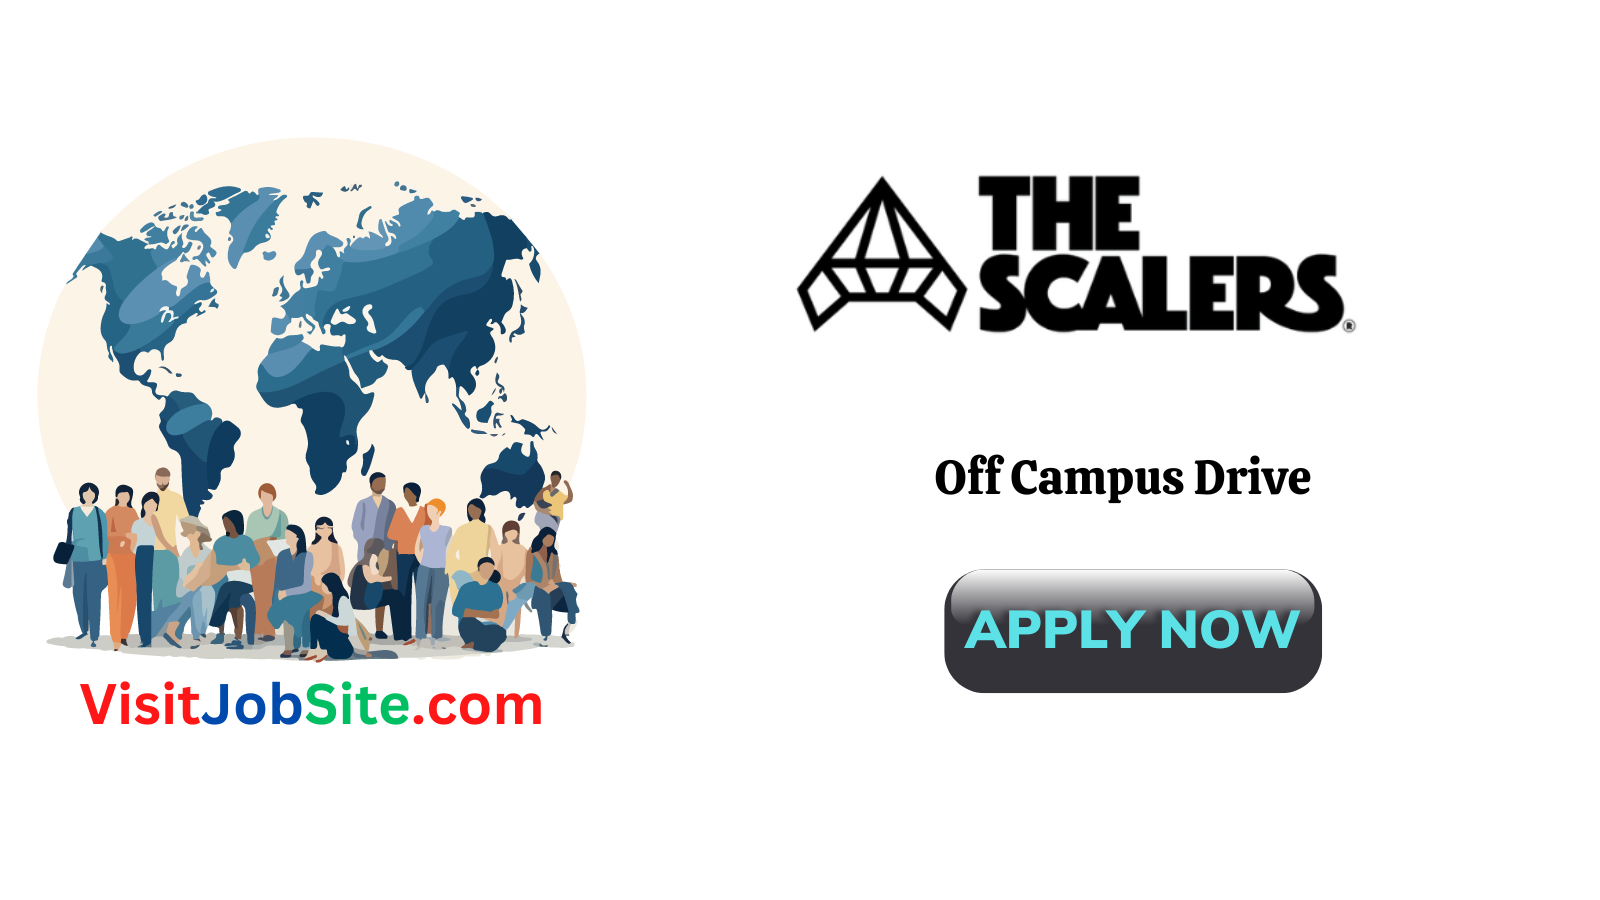 The Scalers Off Campus Drive